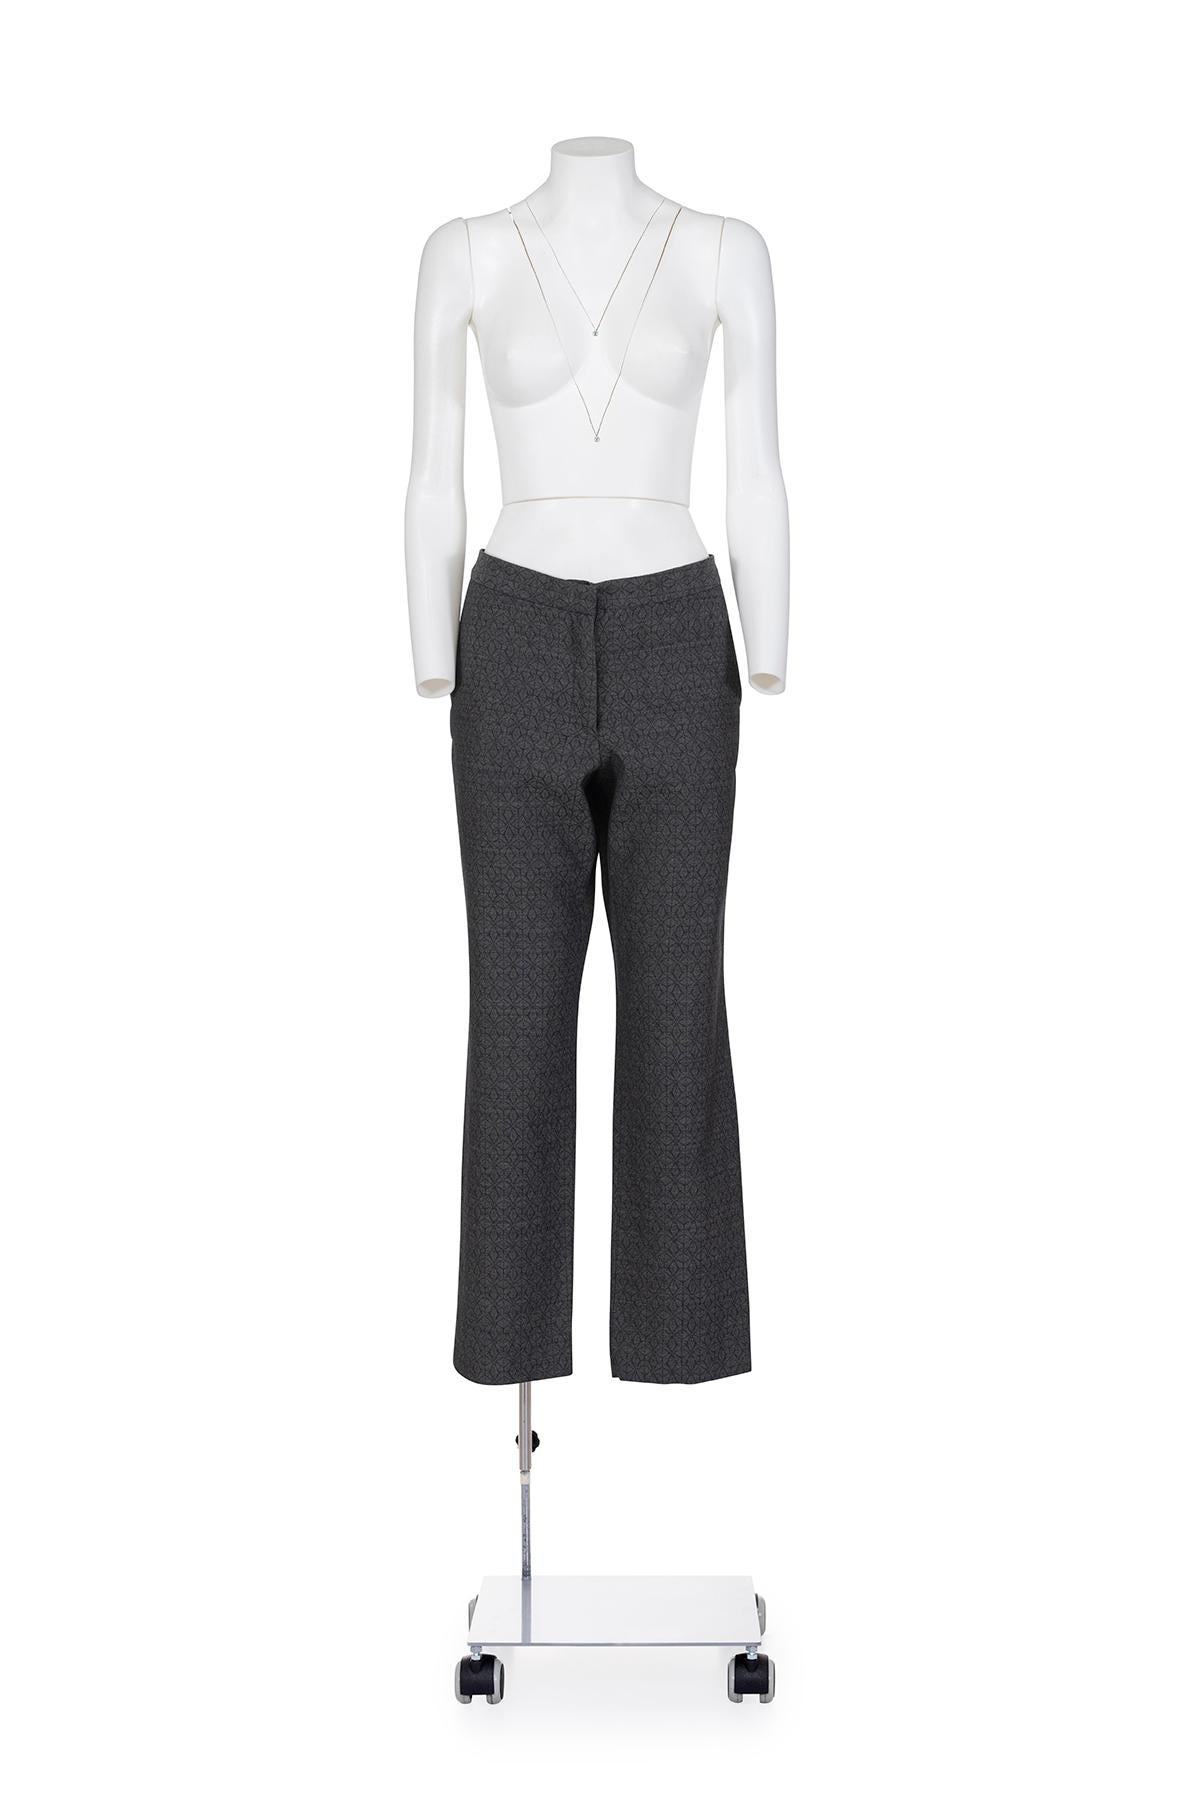 Women's or Men's MAISON MARTIN MARGIELA FW 02 Iconic Jacquard Plastron and Trousers For Sale